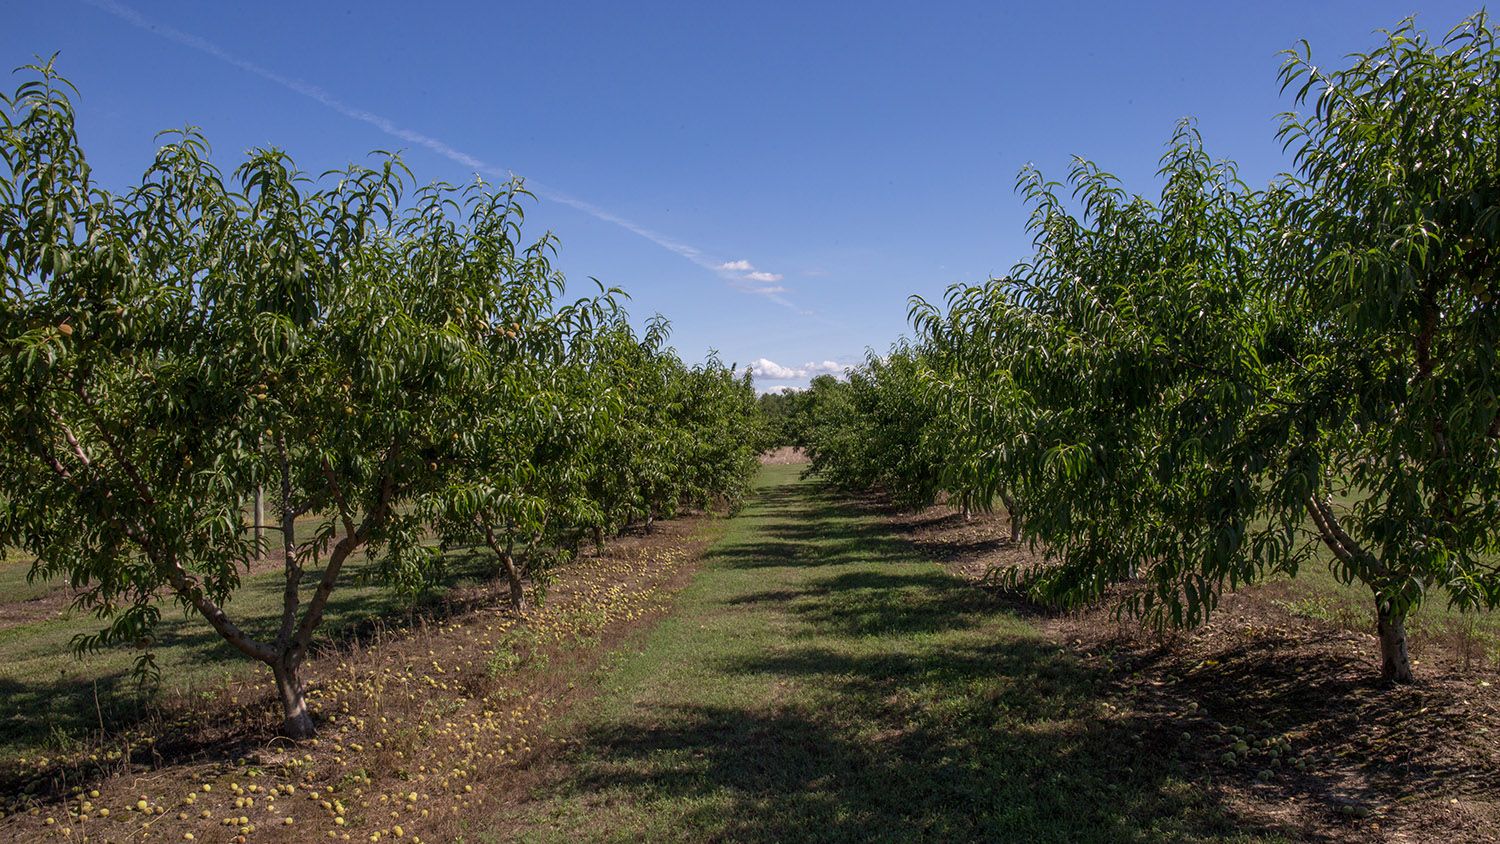 View of trees at the Central Crops Research Station